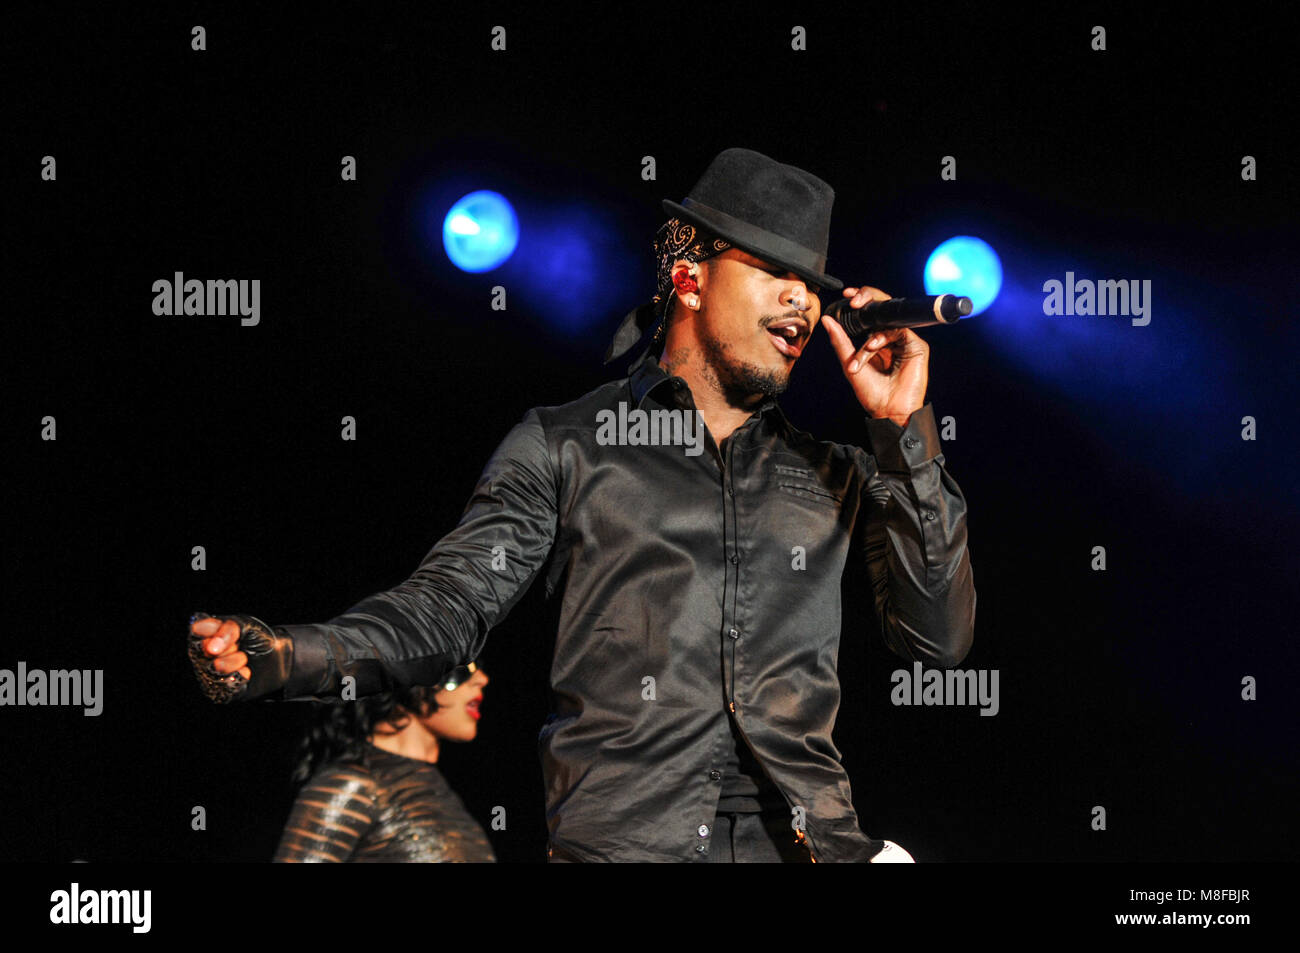 Pop star Ne-Yo performs at a music festival in the summer in the UK Stock Photo